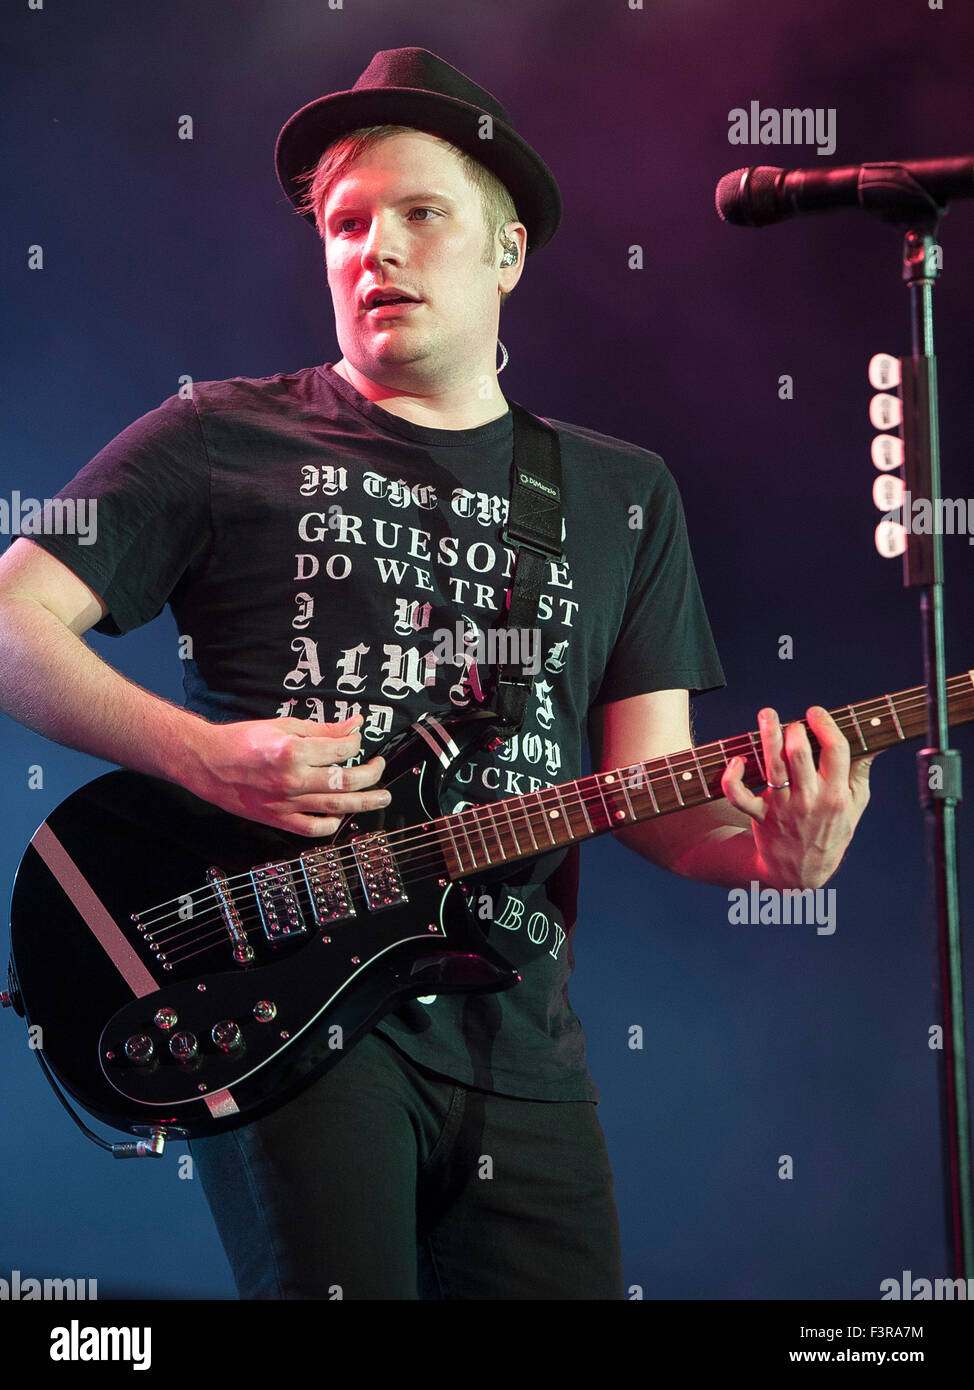 Jul 18, 2015 - Raleigh, North Carolina; USA - Singer/Guitarist PATRICK STUMP of the band Fall Out Boy performs live as their 2015 Tour makes a stop at Walnut Creek Amphitheatre located in Raleigh. Copyright 2015 Jason Moore. © Jason Moore/ZUMA Wire/Alamy Live News Stock Photo